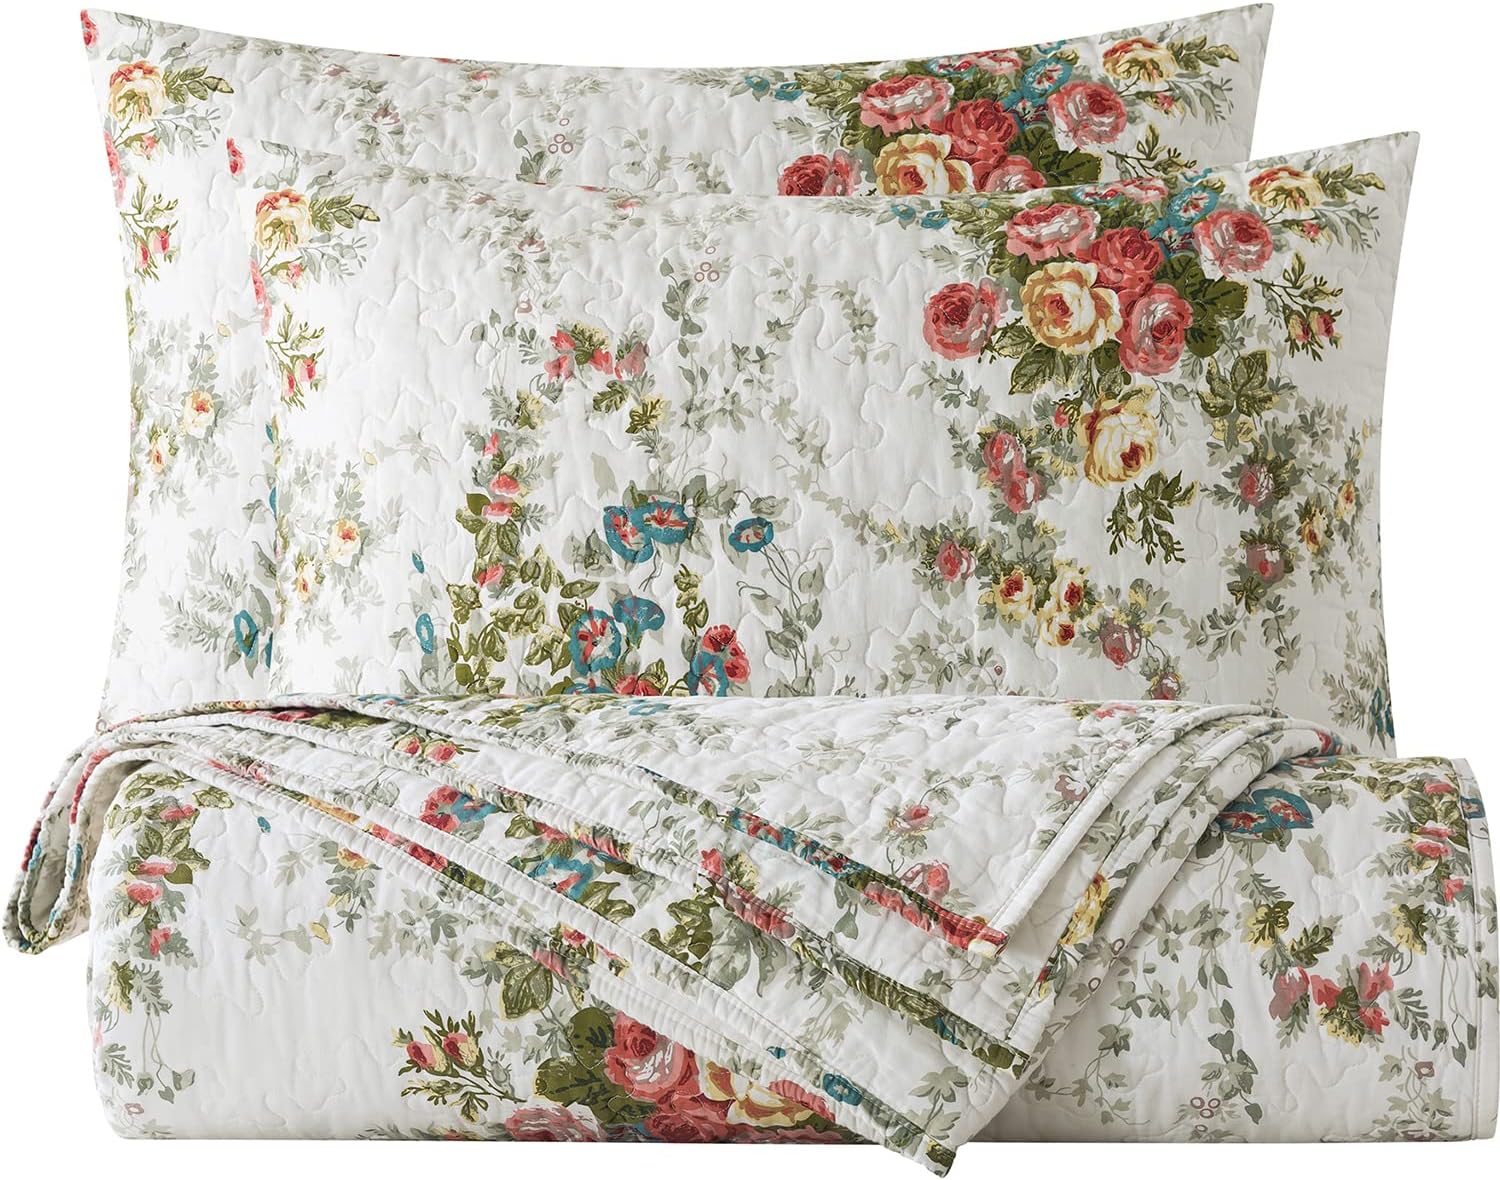 FADFAY Vintage Rose Quilt Sets King Cotton Shabby Floral Lightweight Bedspreads All-Season, 106x95'' Chic Flower Print Cream White Farmhouse Coverlet Antique Bedding with 2 Pillow Shams, 3 Pcs